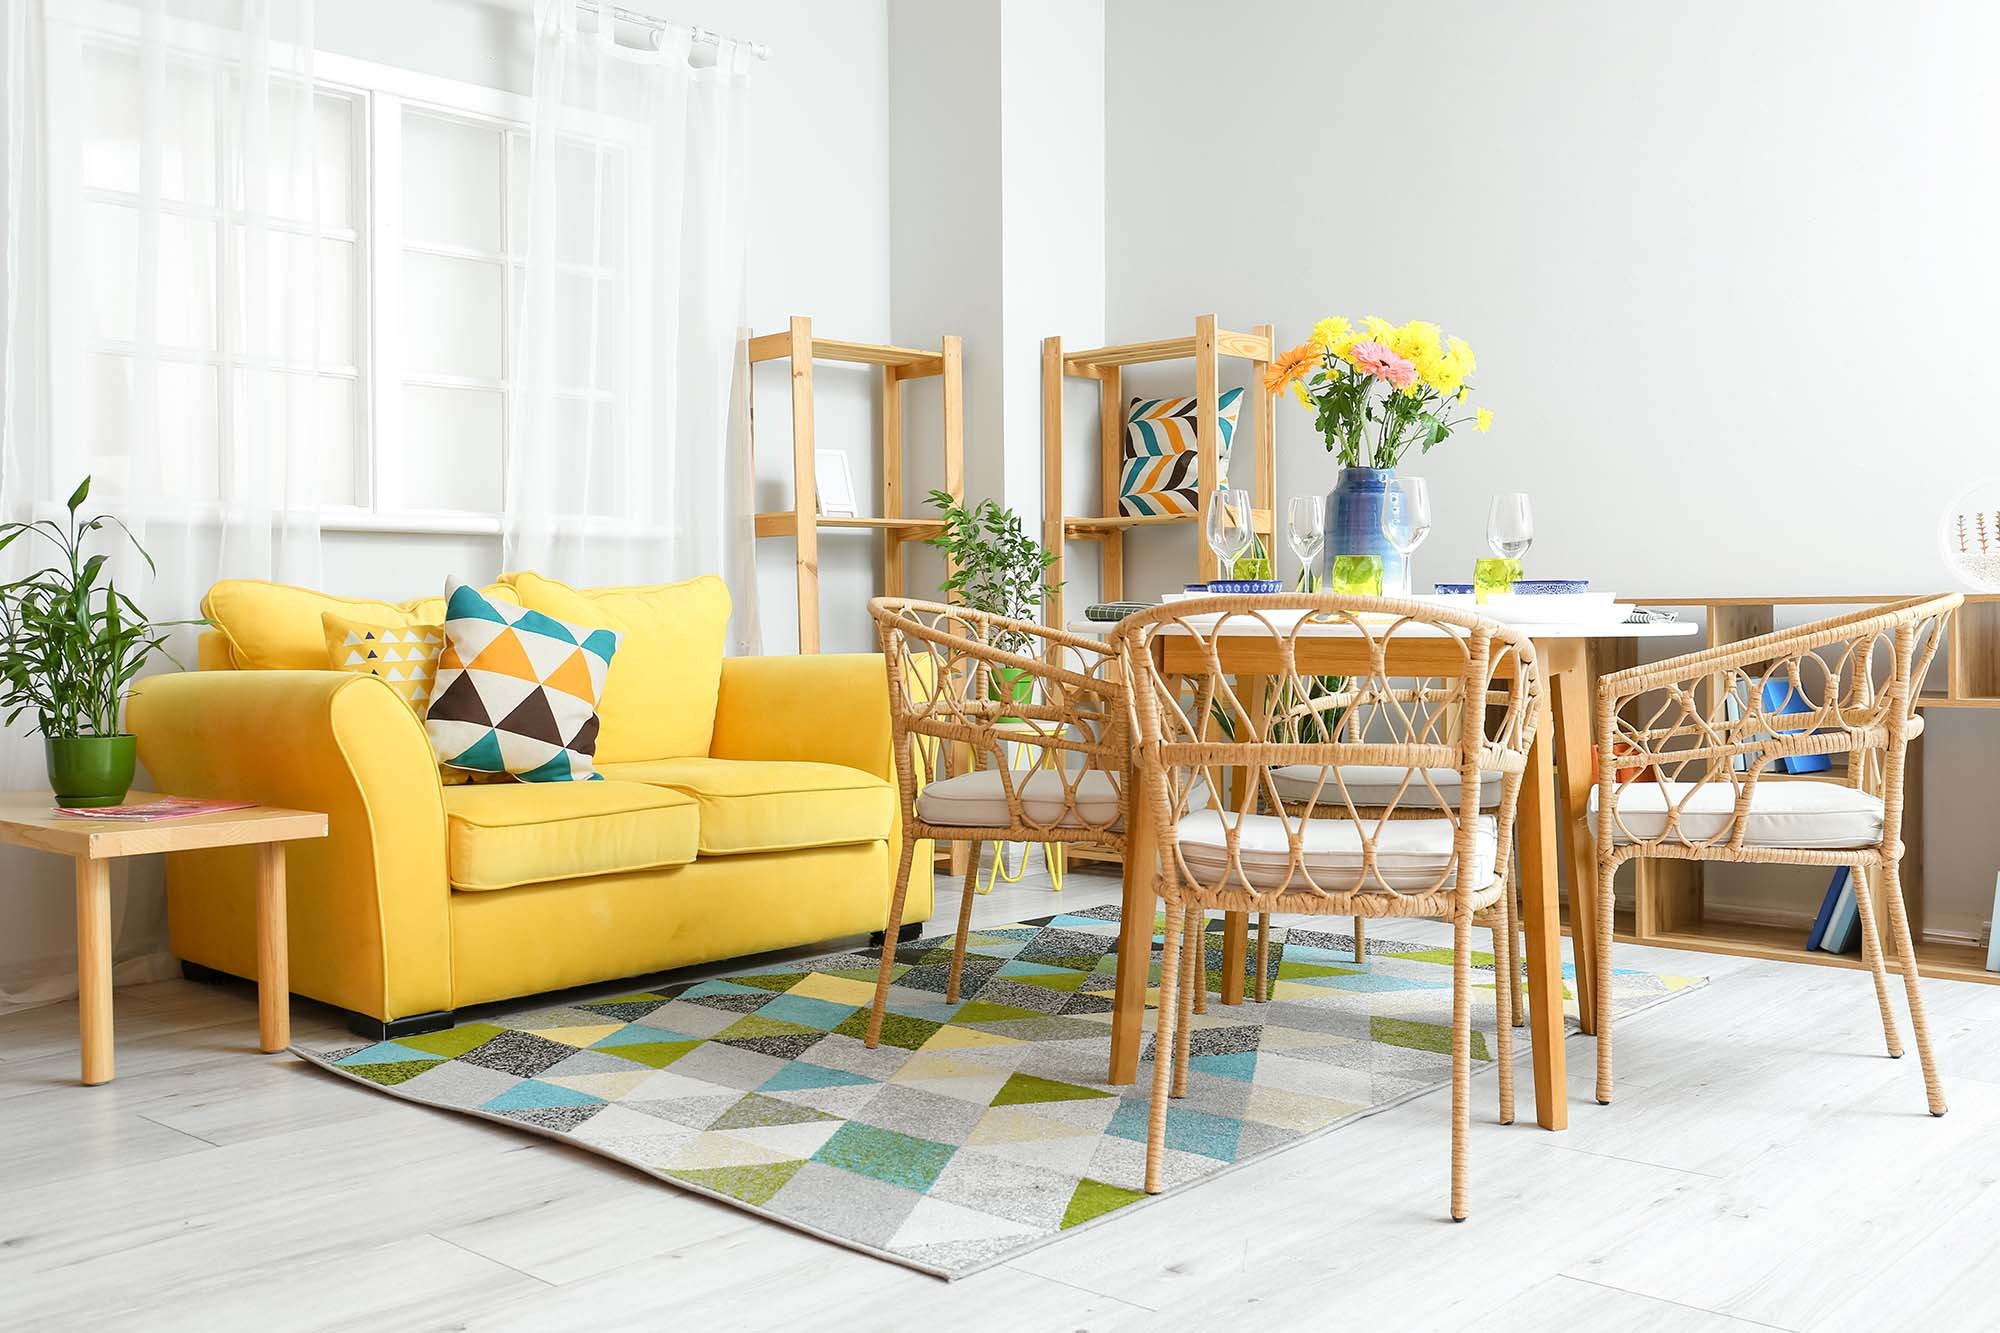 yellow couch and wood table and chairs on a patterned color rug in a bright living room with white hardwood floor from Stoller Floors in Orrville, OH